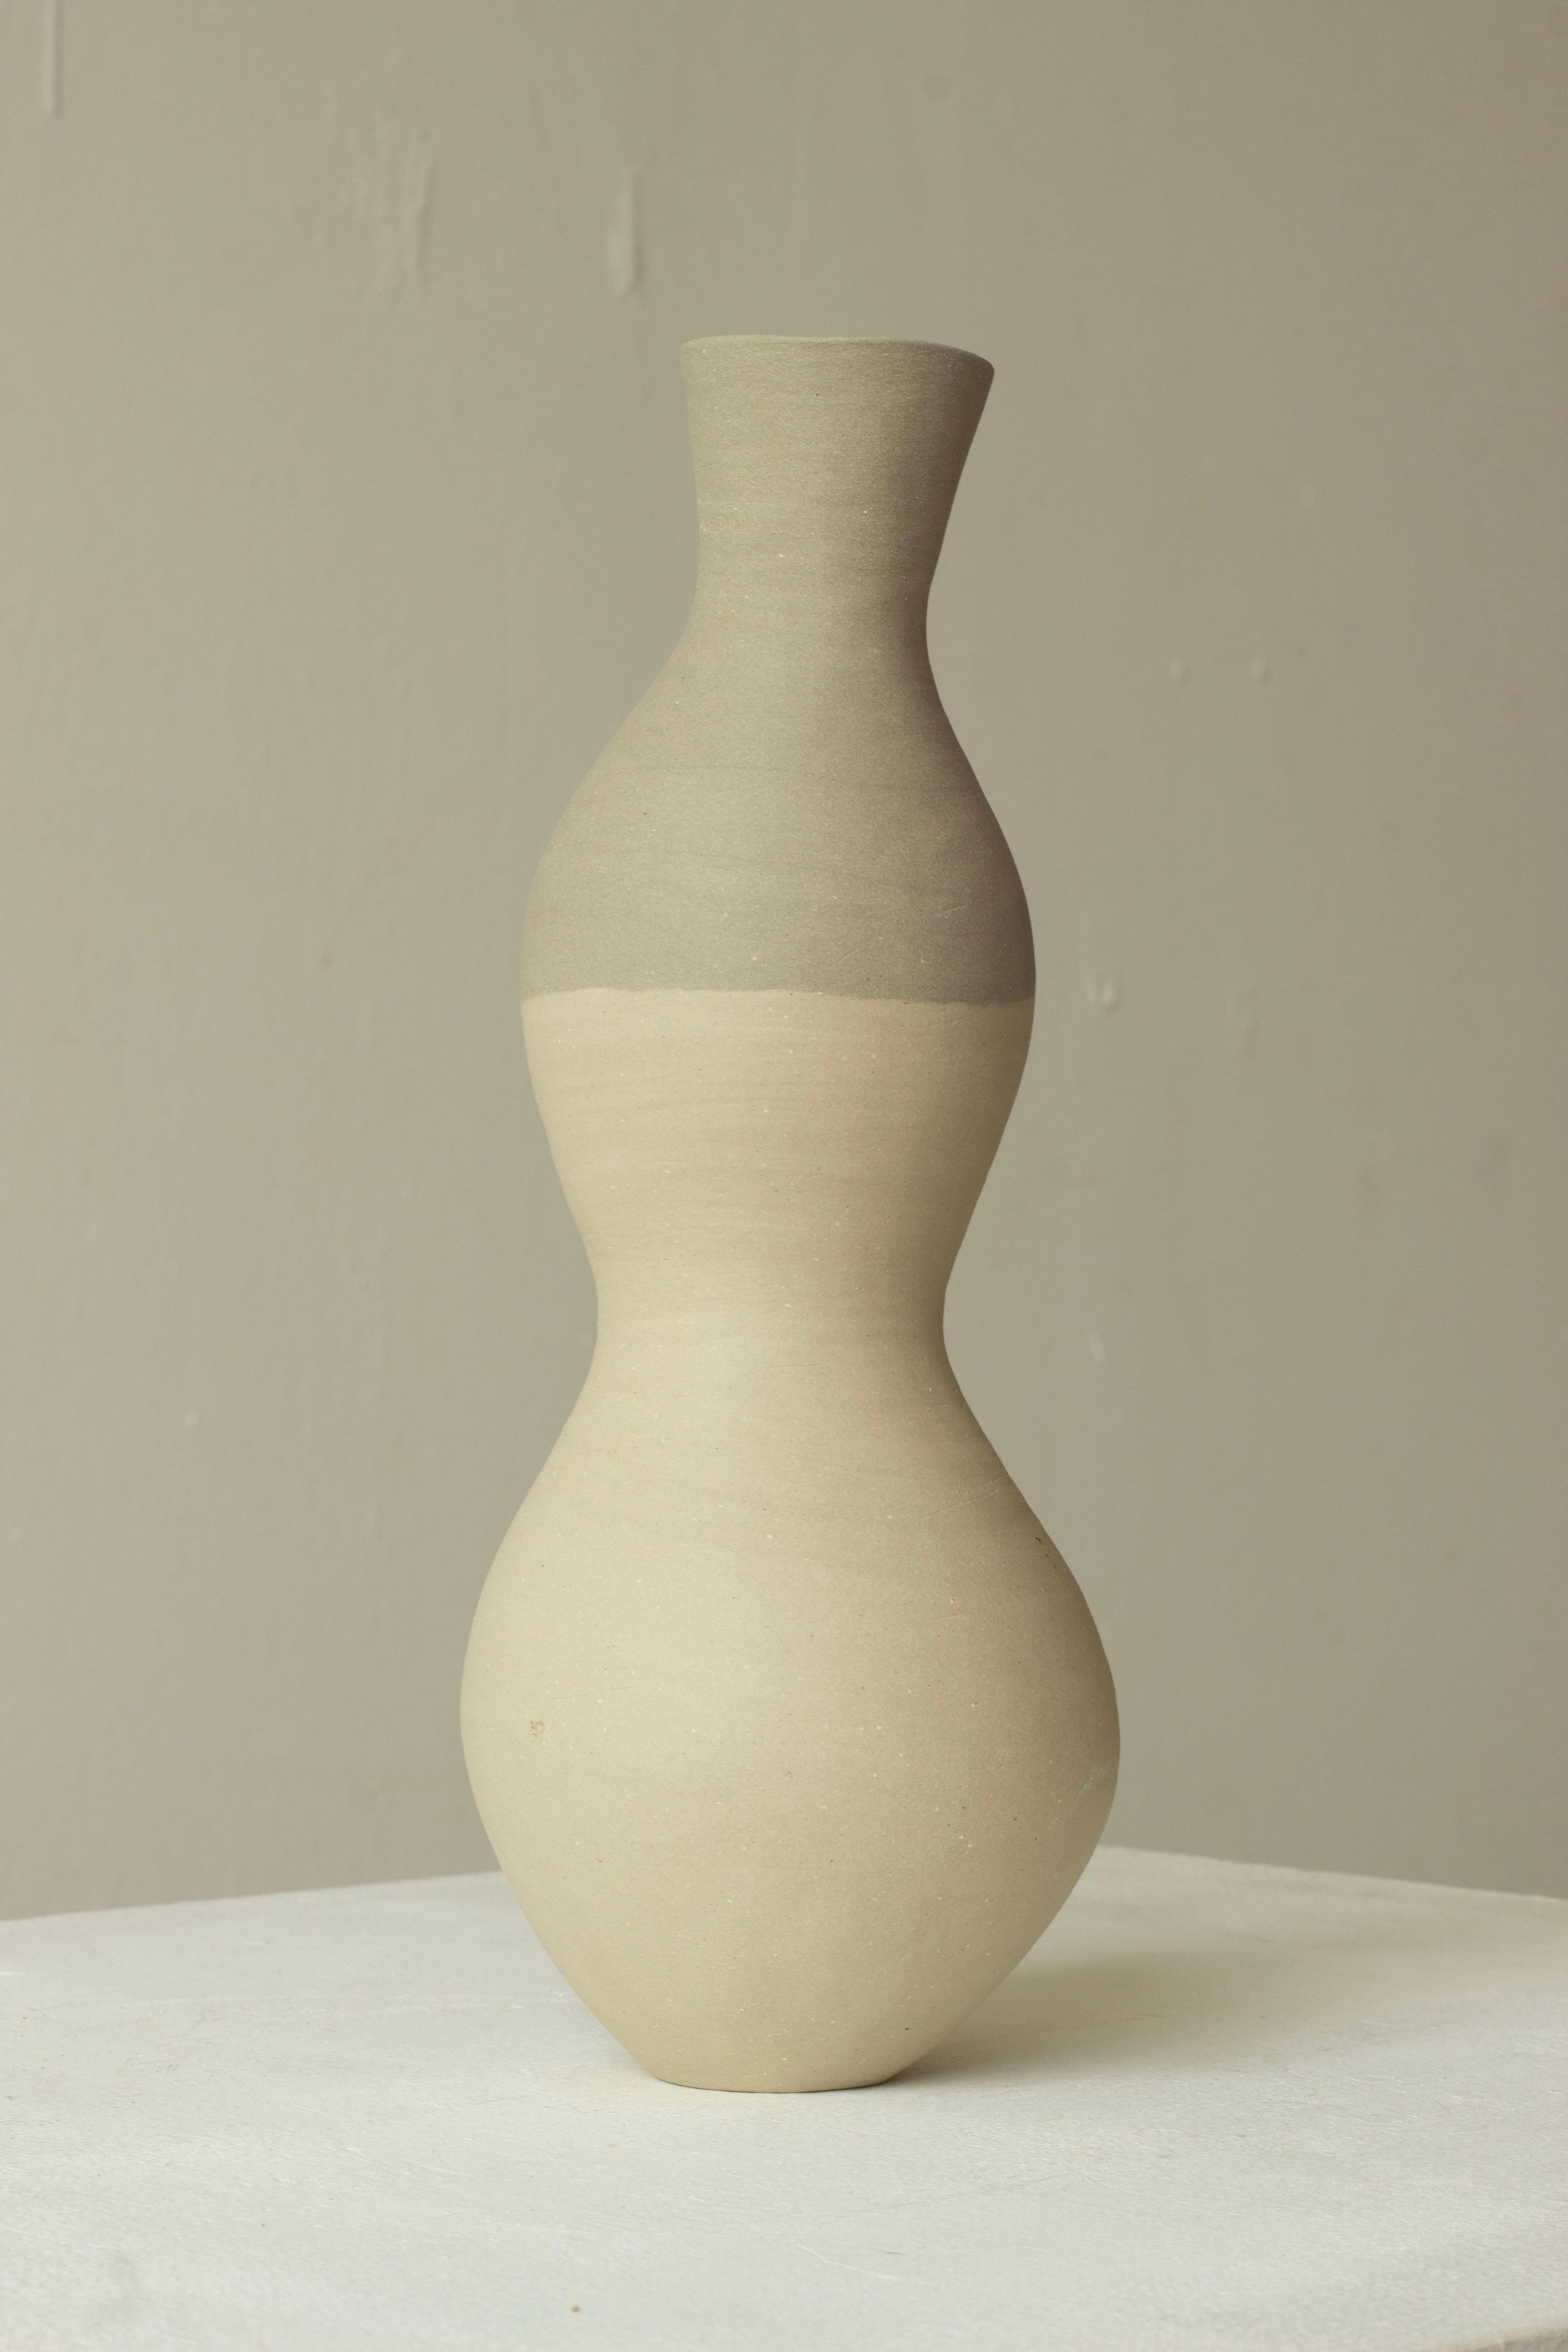 Woman 207 Vase by Karina Smagulova
One of a Kind.
Dimensions: Ø 10 x H 25 cm.
Materials: White and grey stoneware.
​
With an Armenian and Kazakhstan heritage, Karina Smagulova was born in Greece in 1995 and graduated with a diploma in Architecture